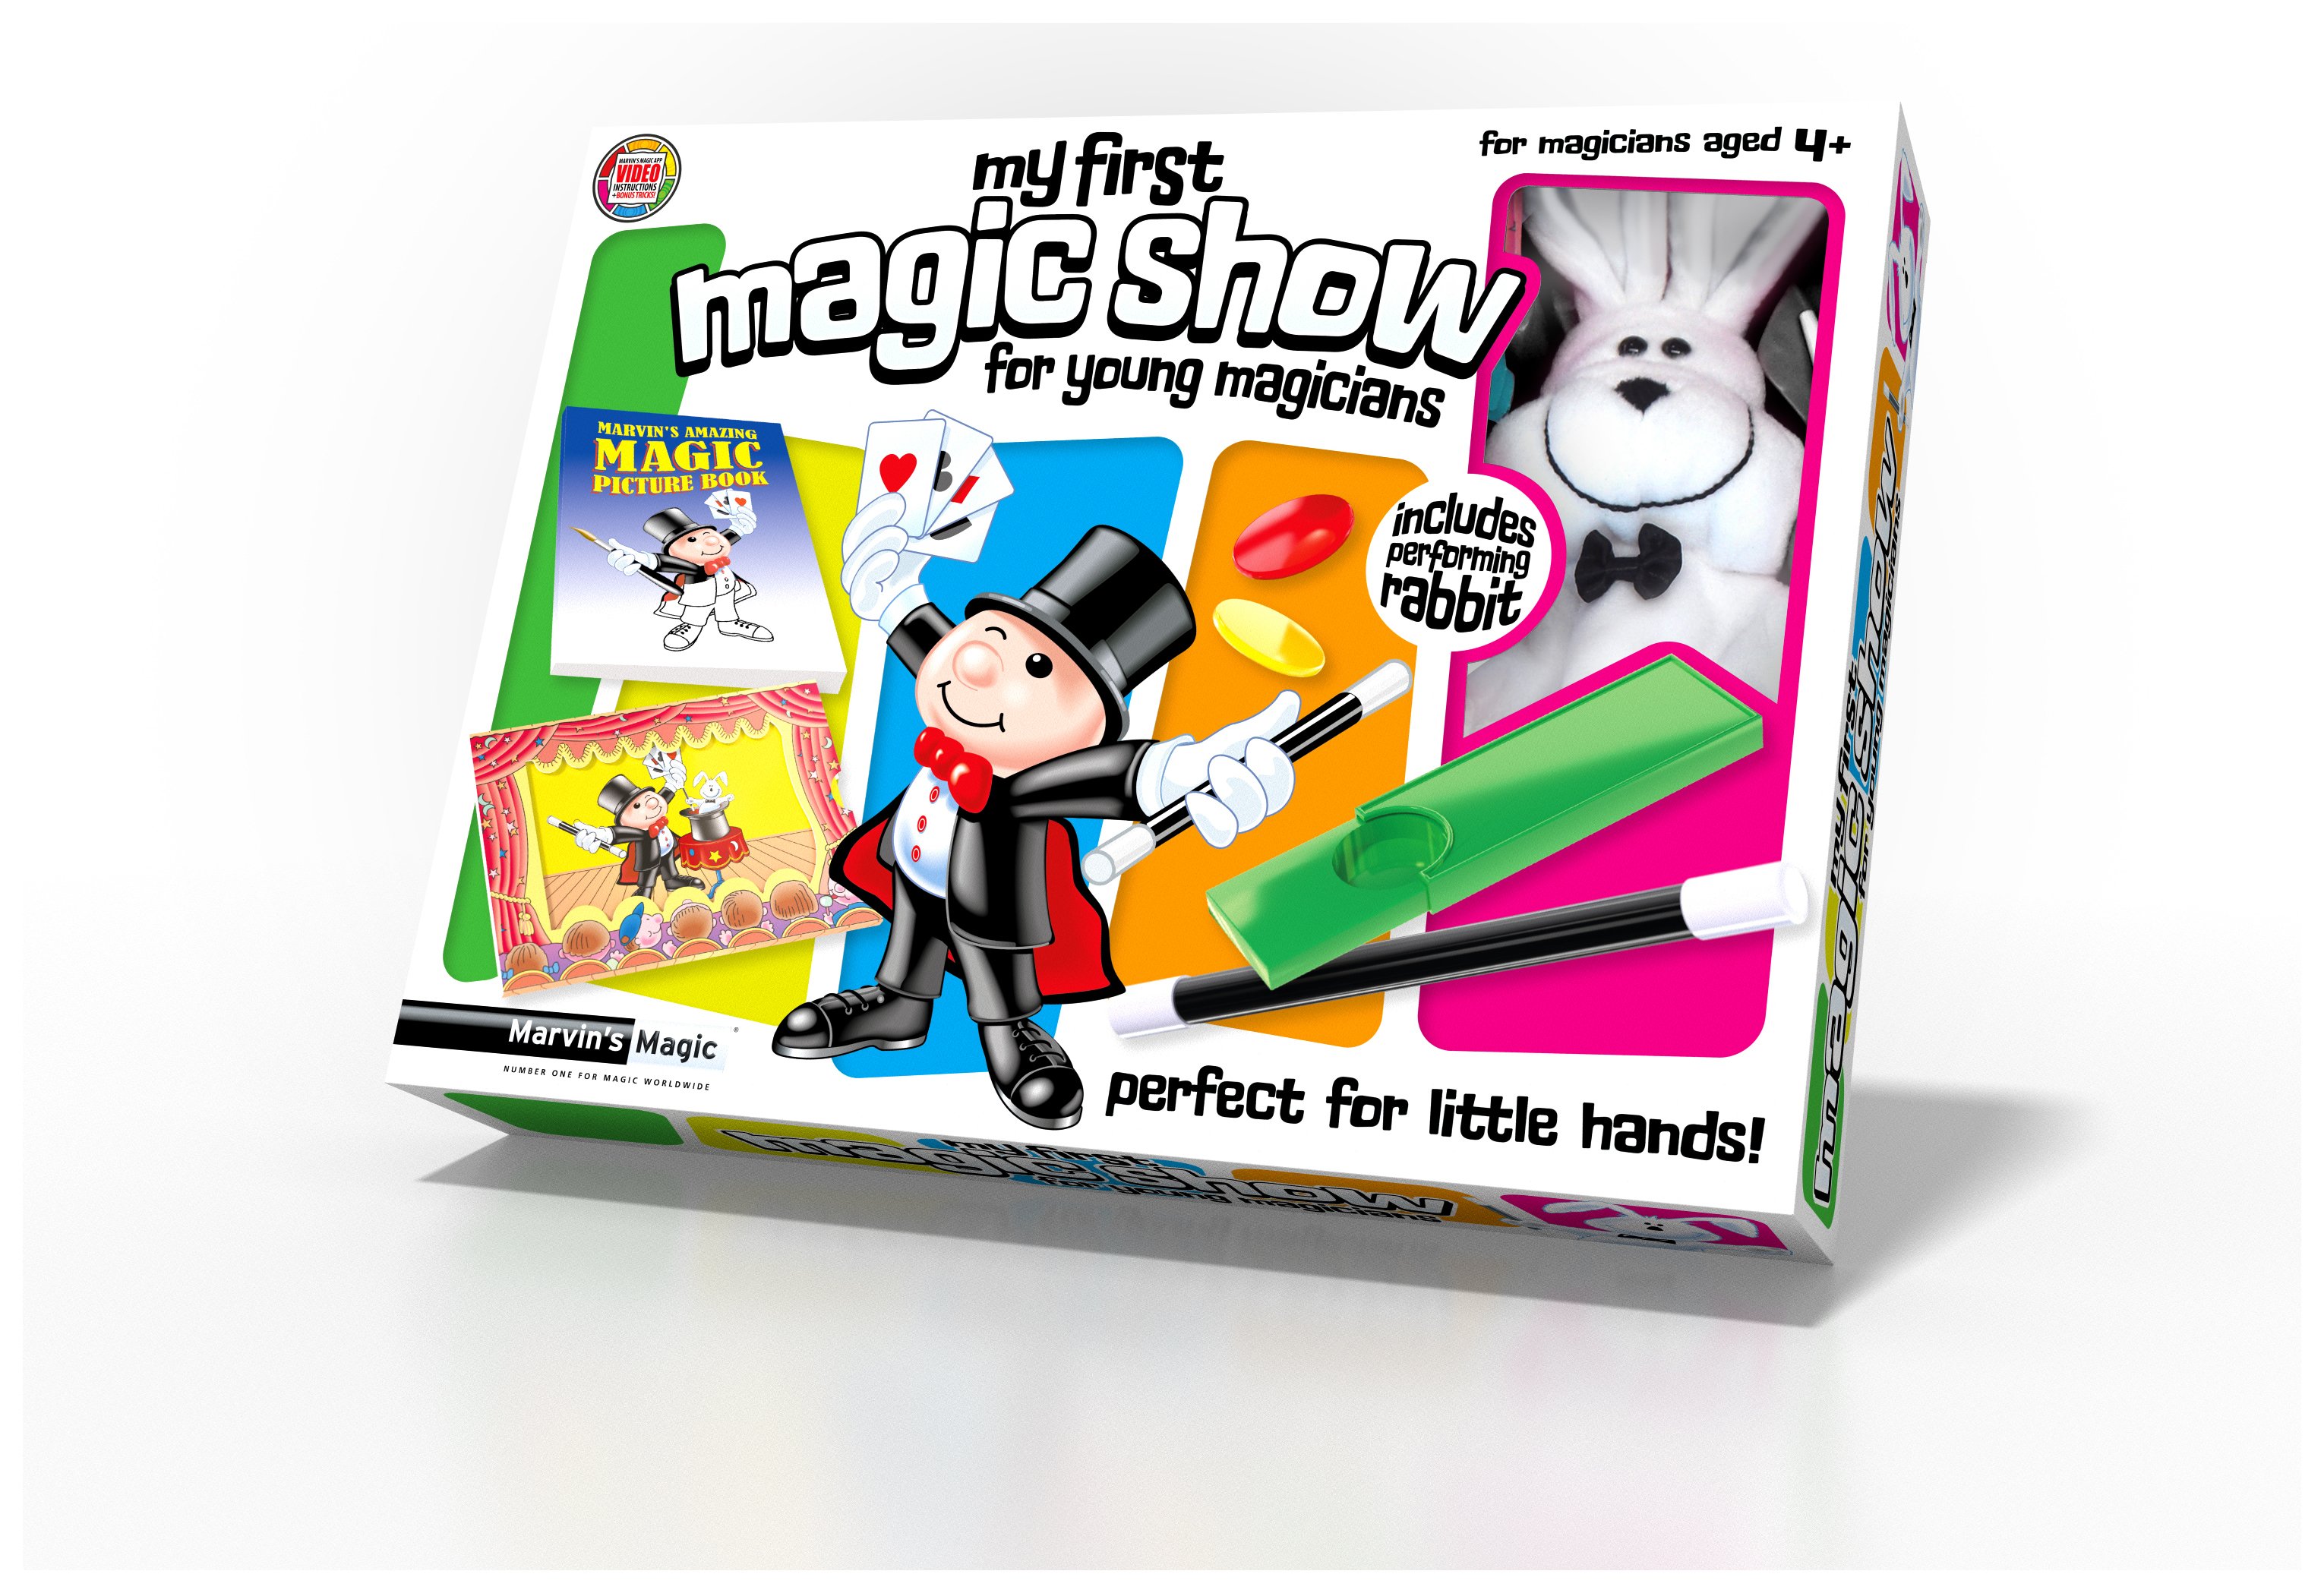 Marvin's Magic My First Magic Show